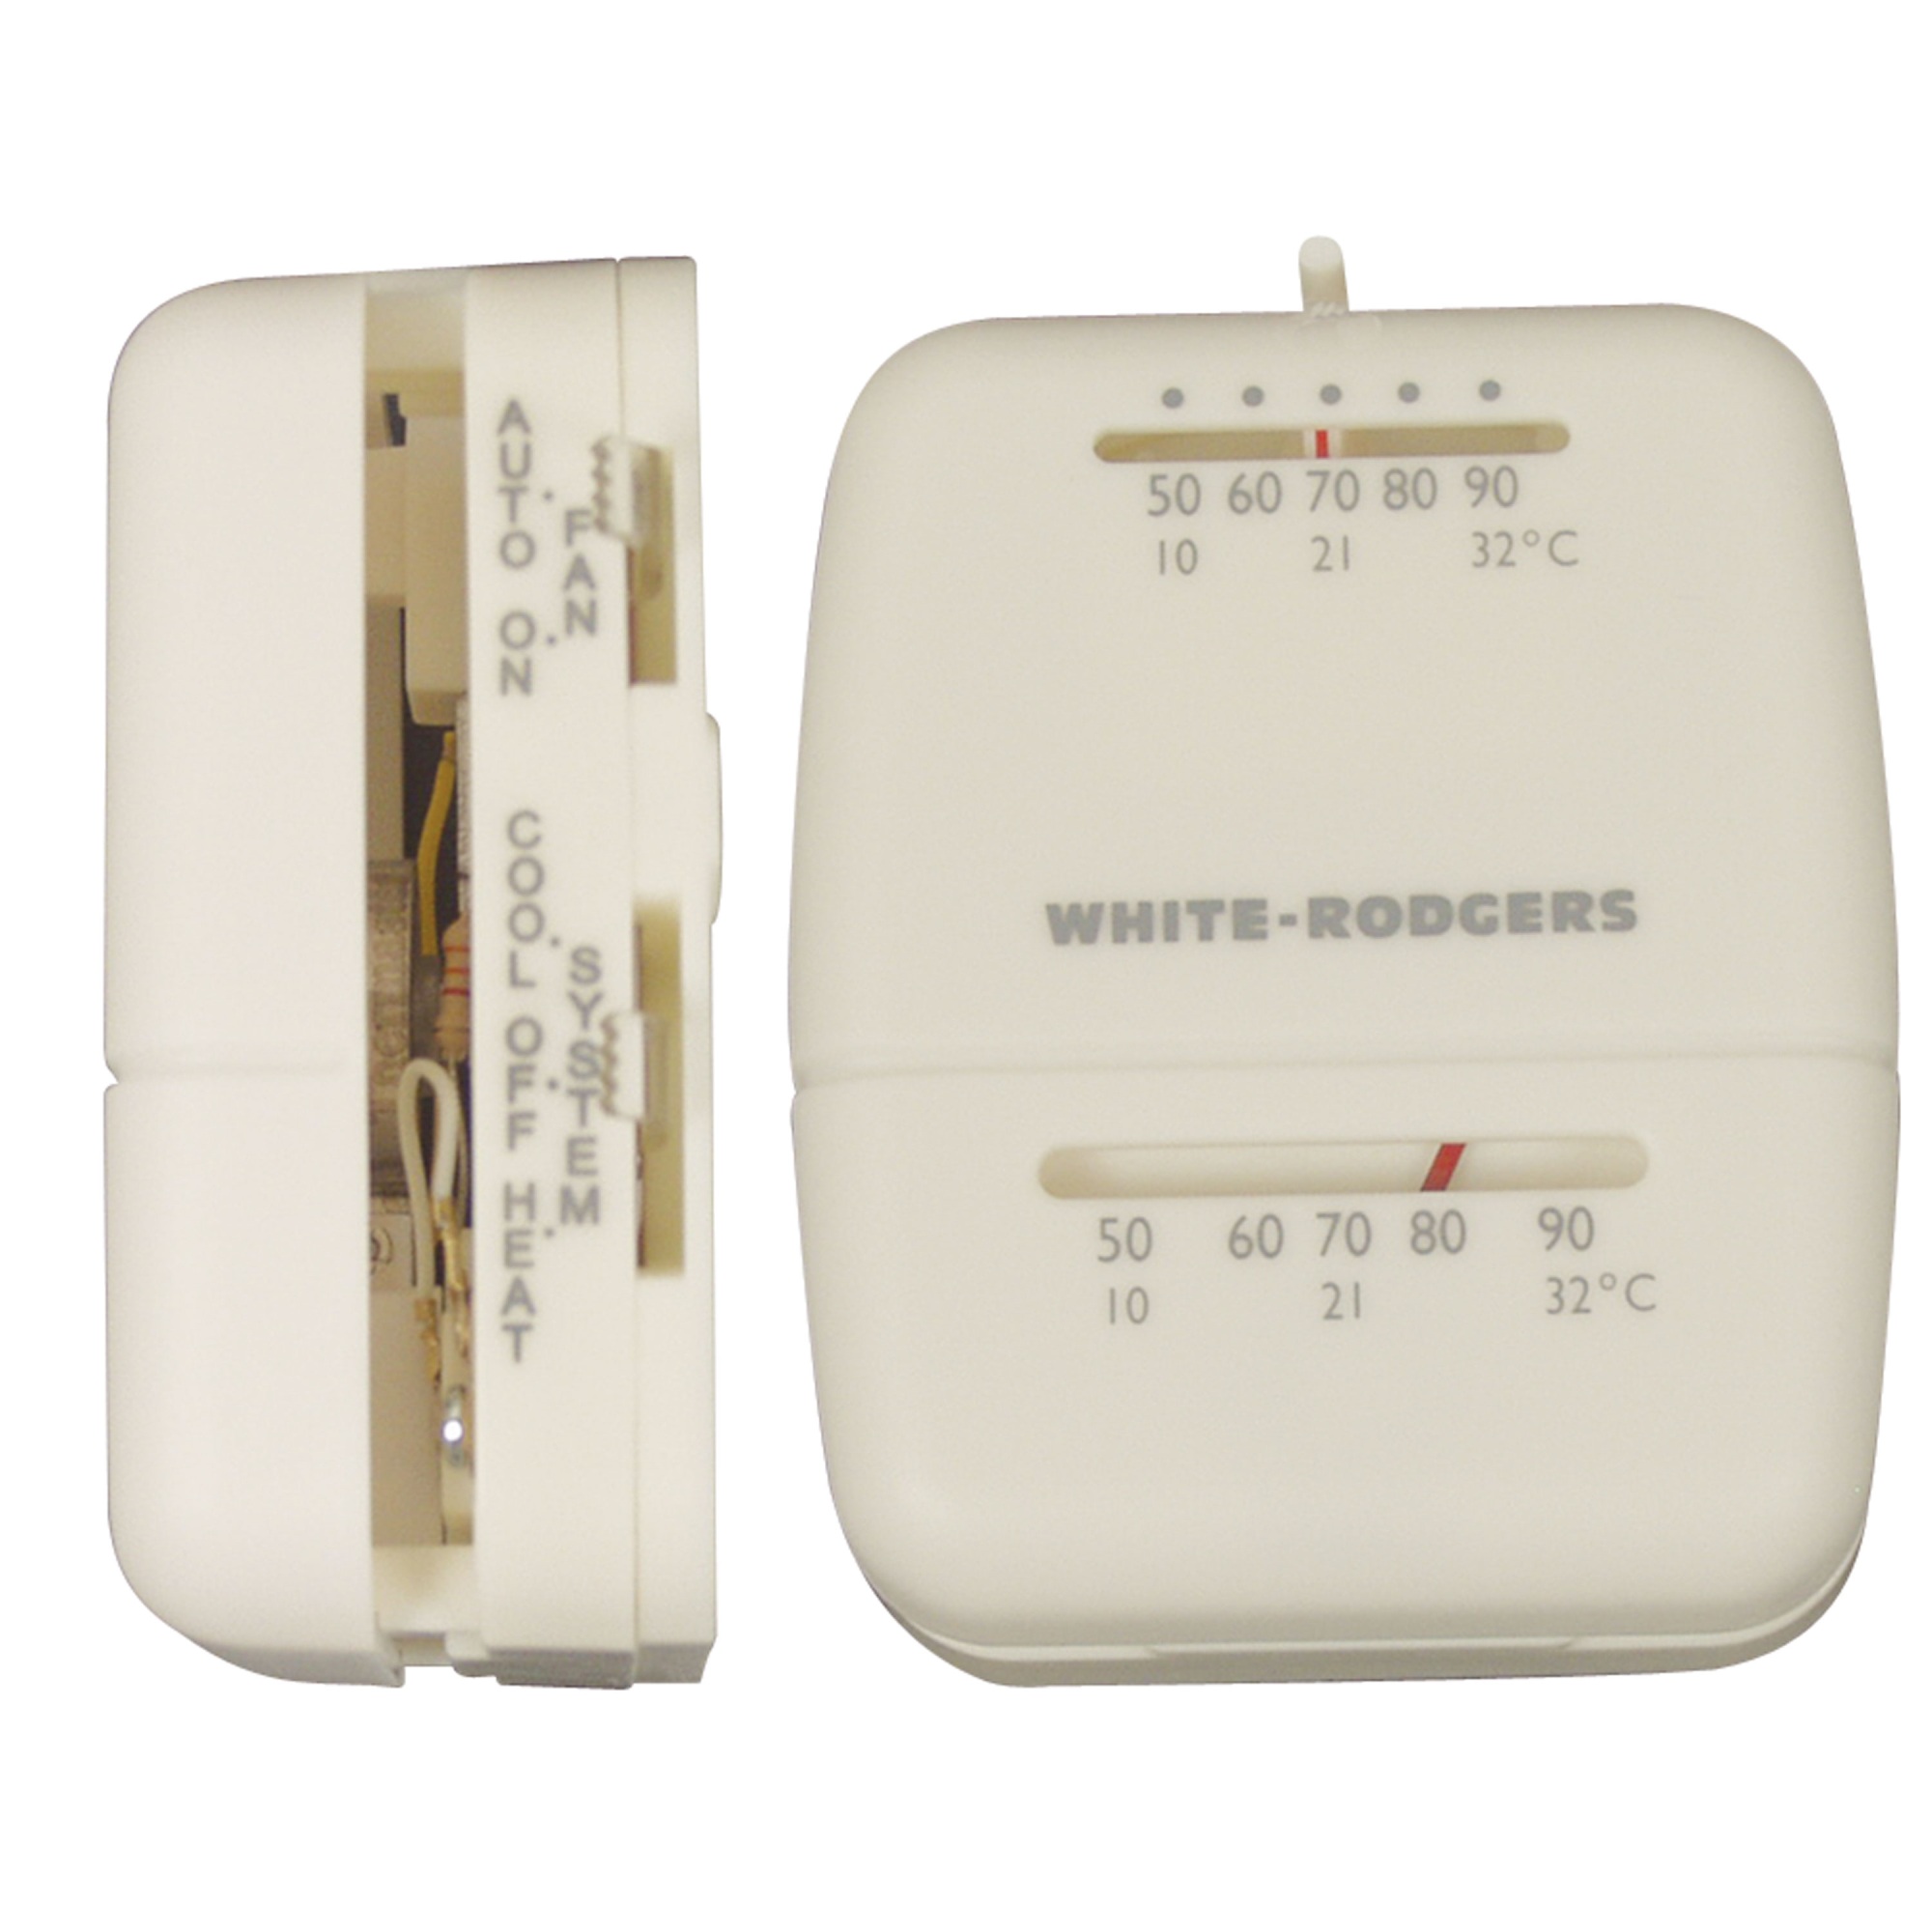 White-Rodgers 7301 (1C26-101S1) White-Rodgers Heat/Cool Thermostat